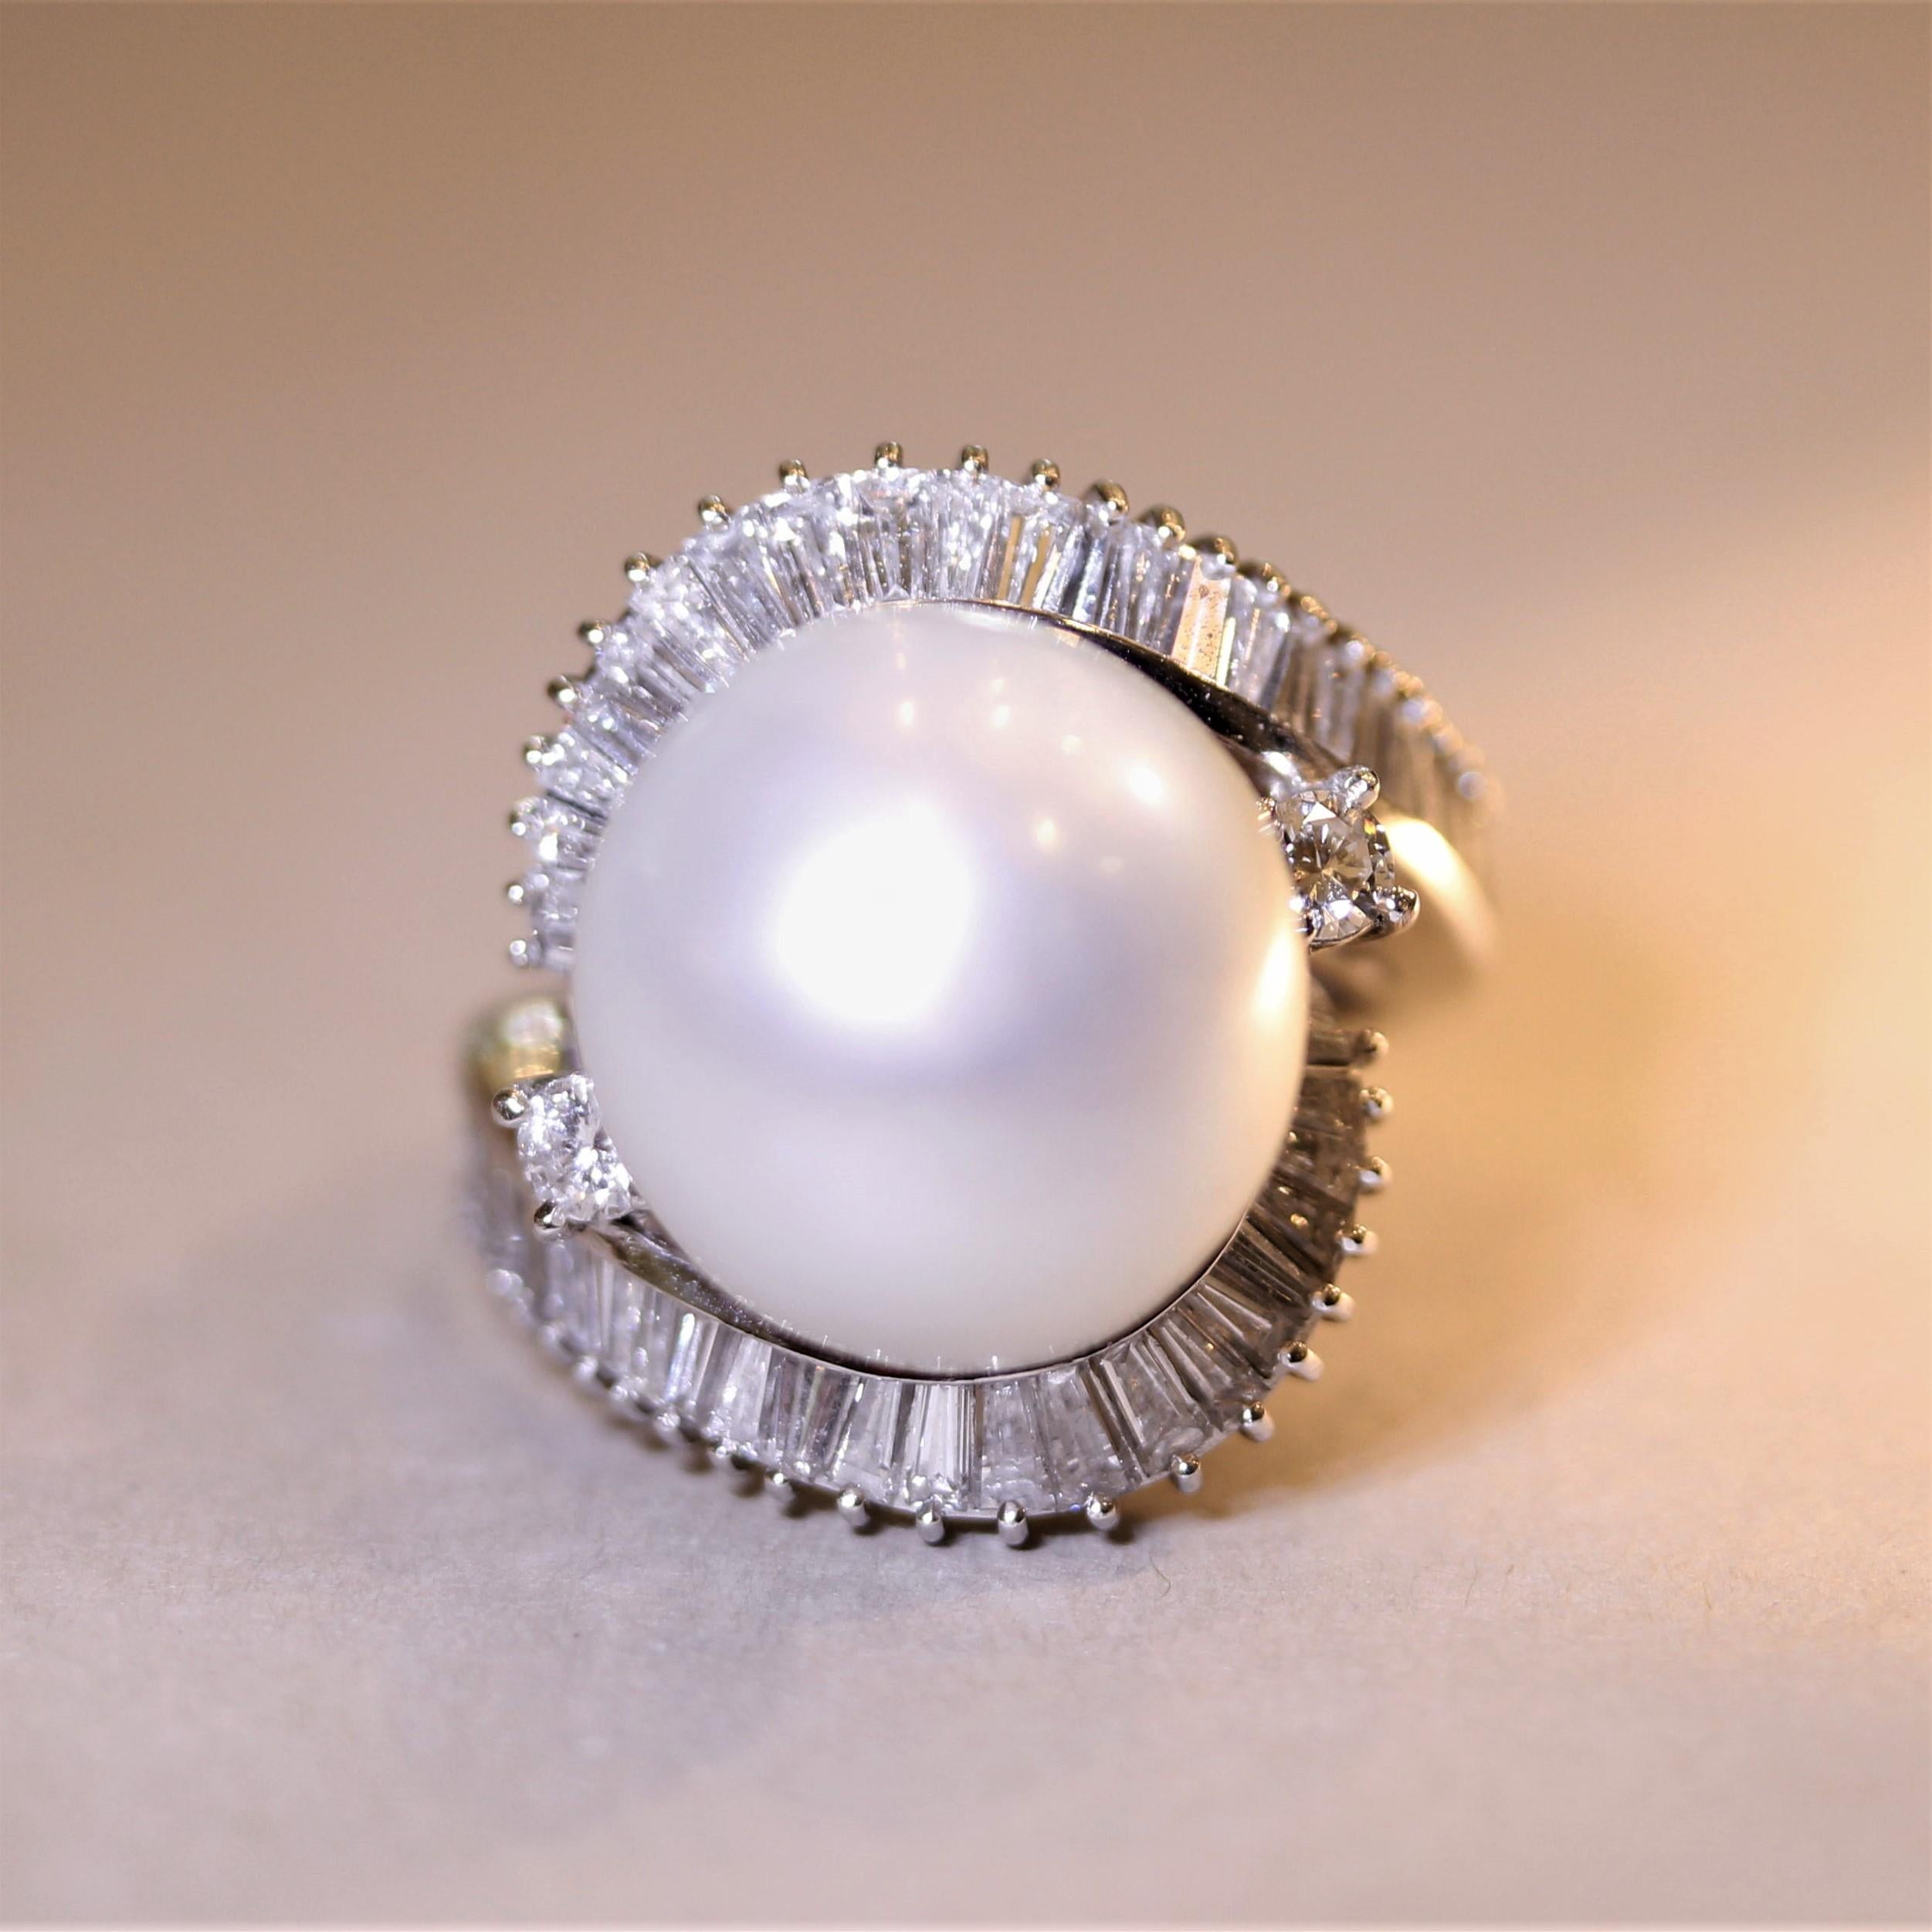 A large and impressive South Sea pearl! It measures 15.5 millimeters and has excellent luster with a soft pink overtone. It is accented by 2.50 carats of round brilliant-cut and baguette-cut diamonds which are set around the pearl in a spiraling